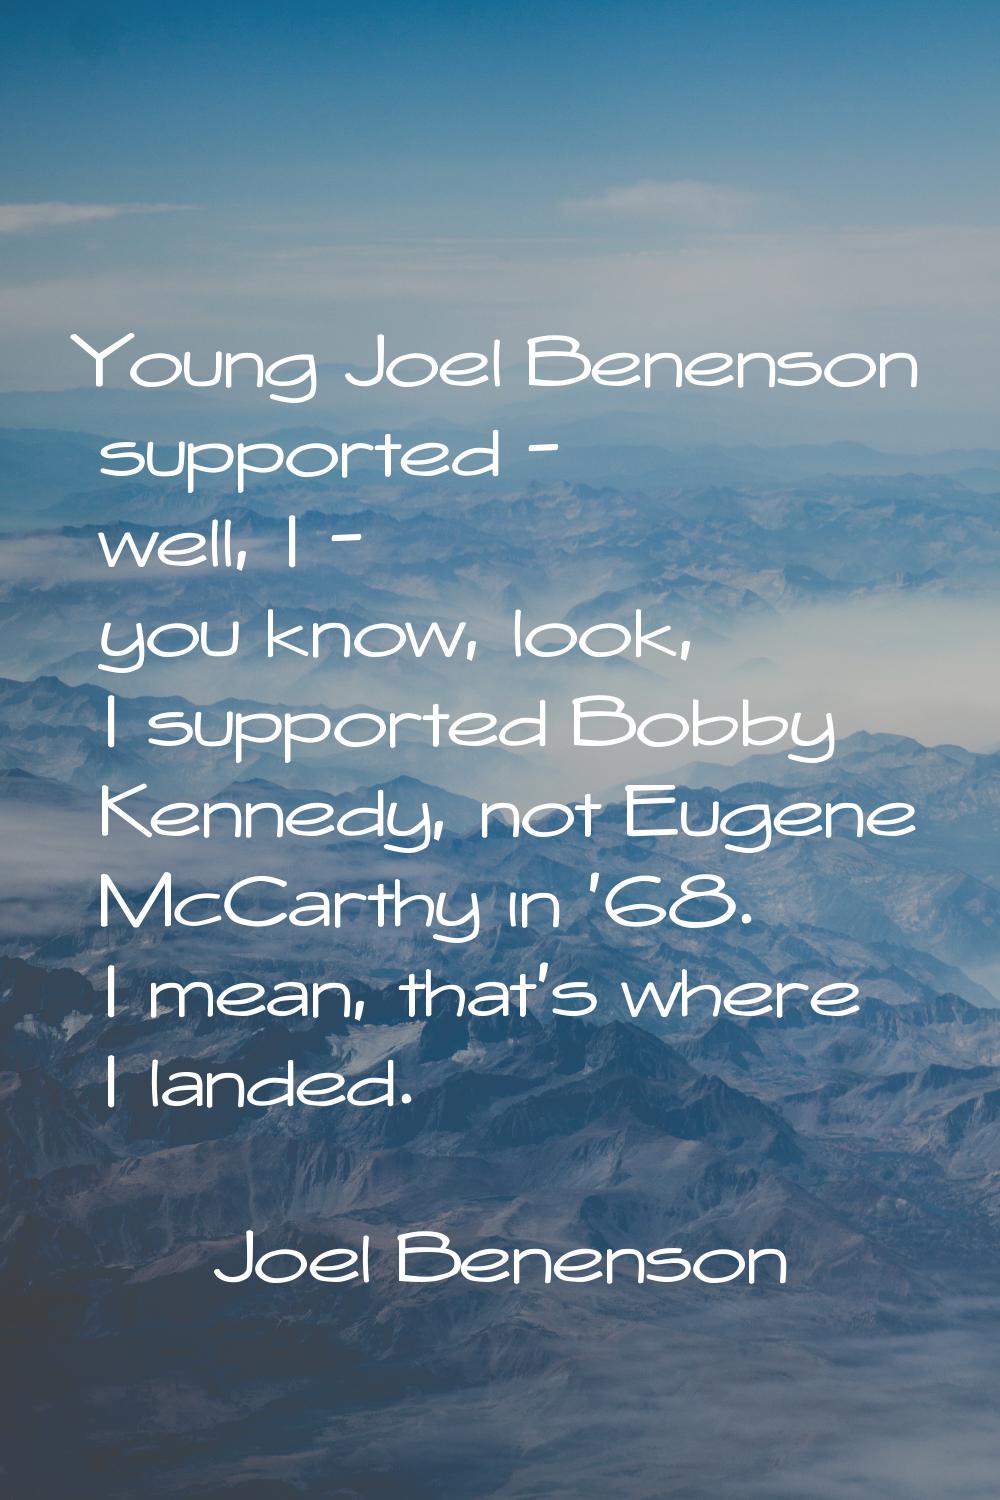 Young Joel Benenson supported - well, I - you know, look, I supported Bobby Kennedy, not Eugene McC